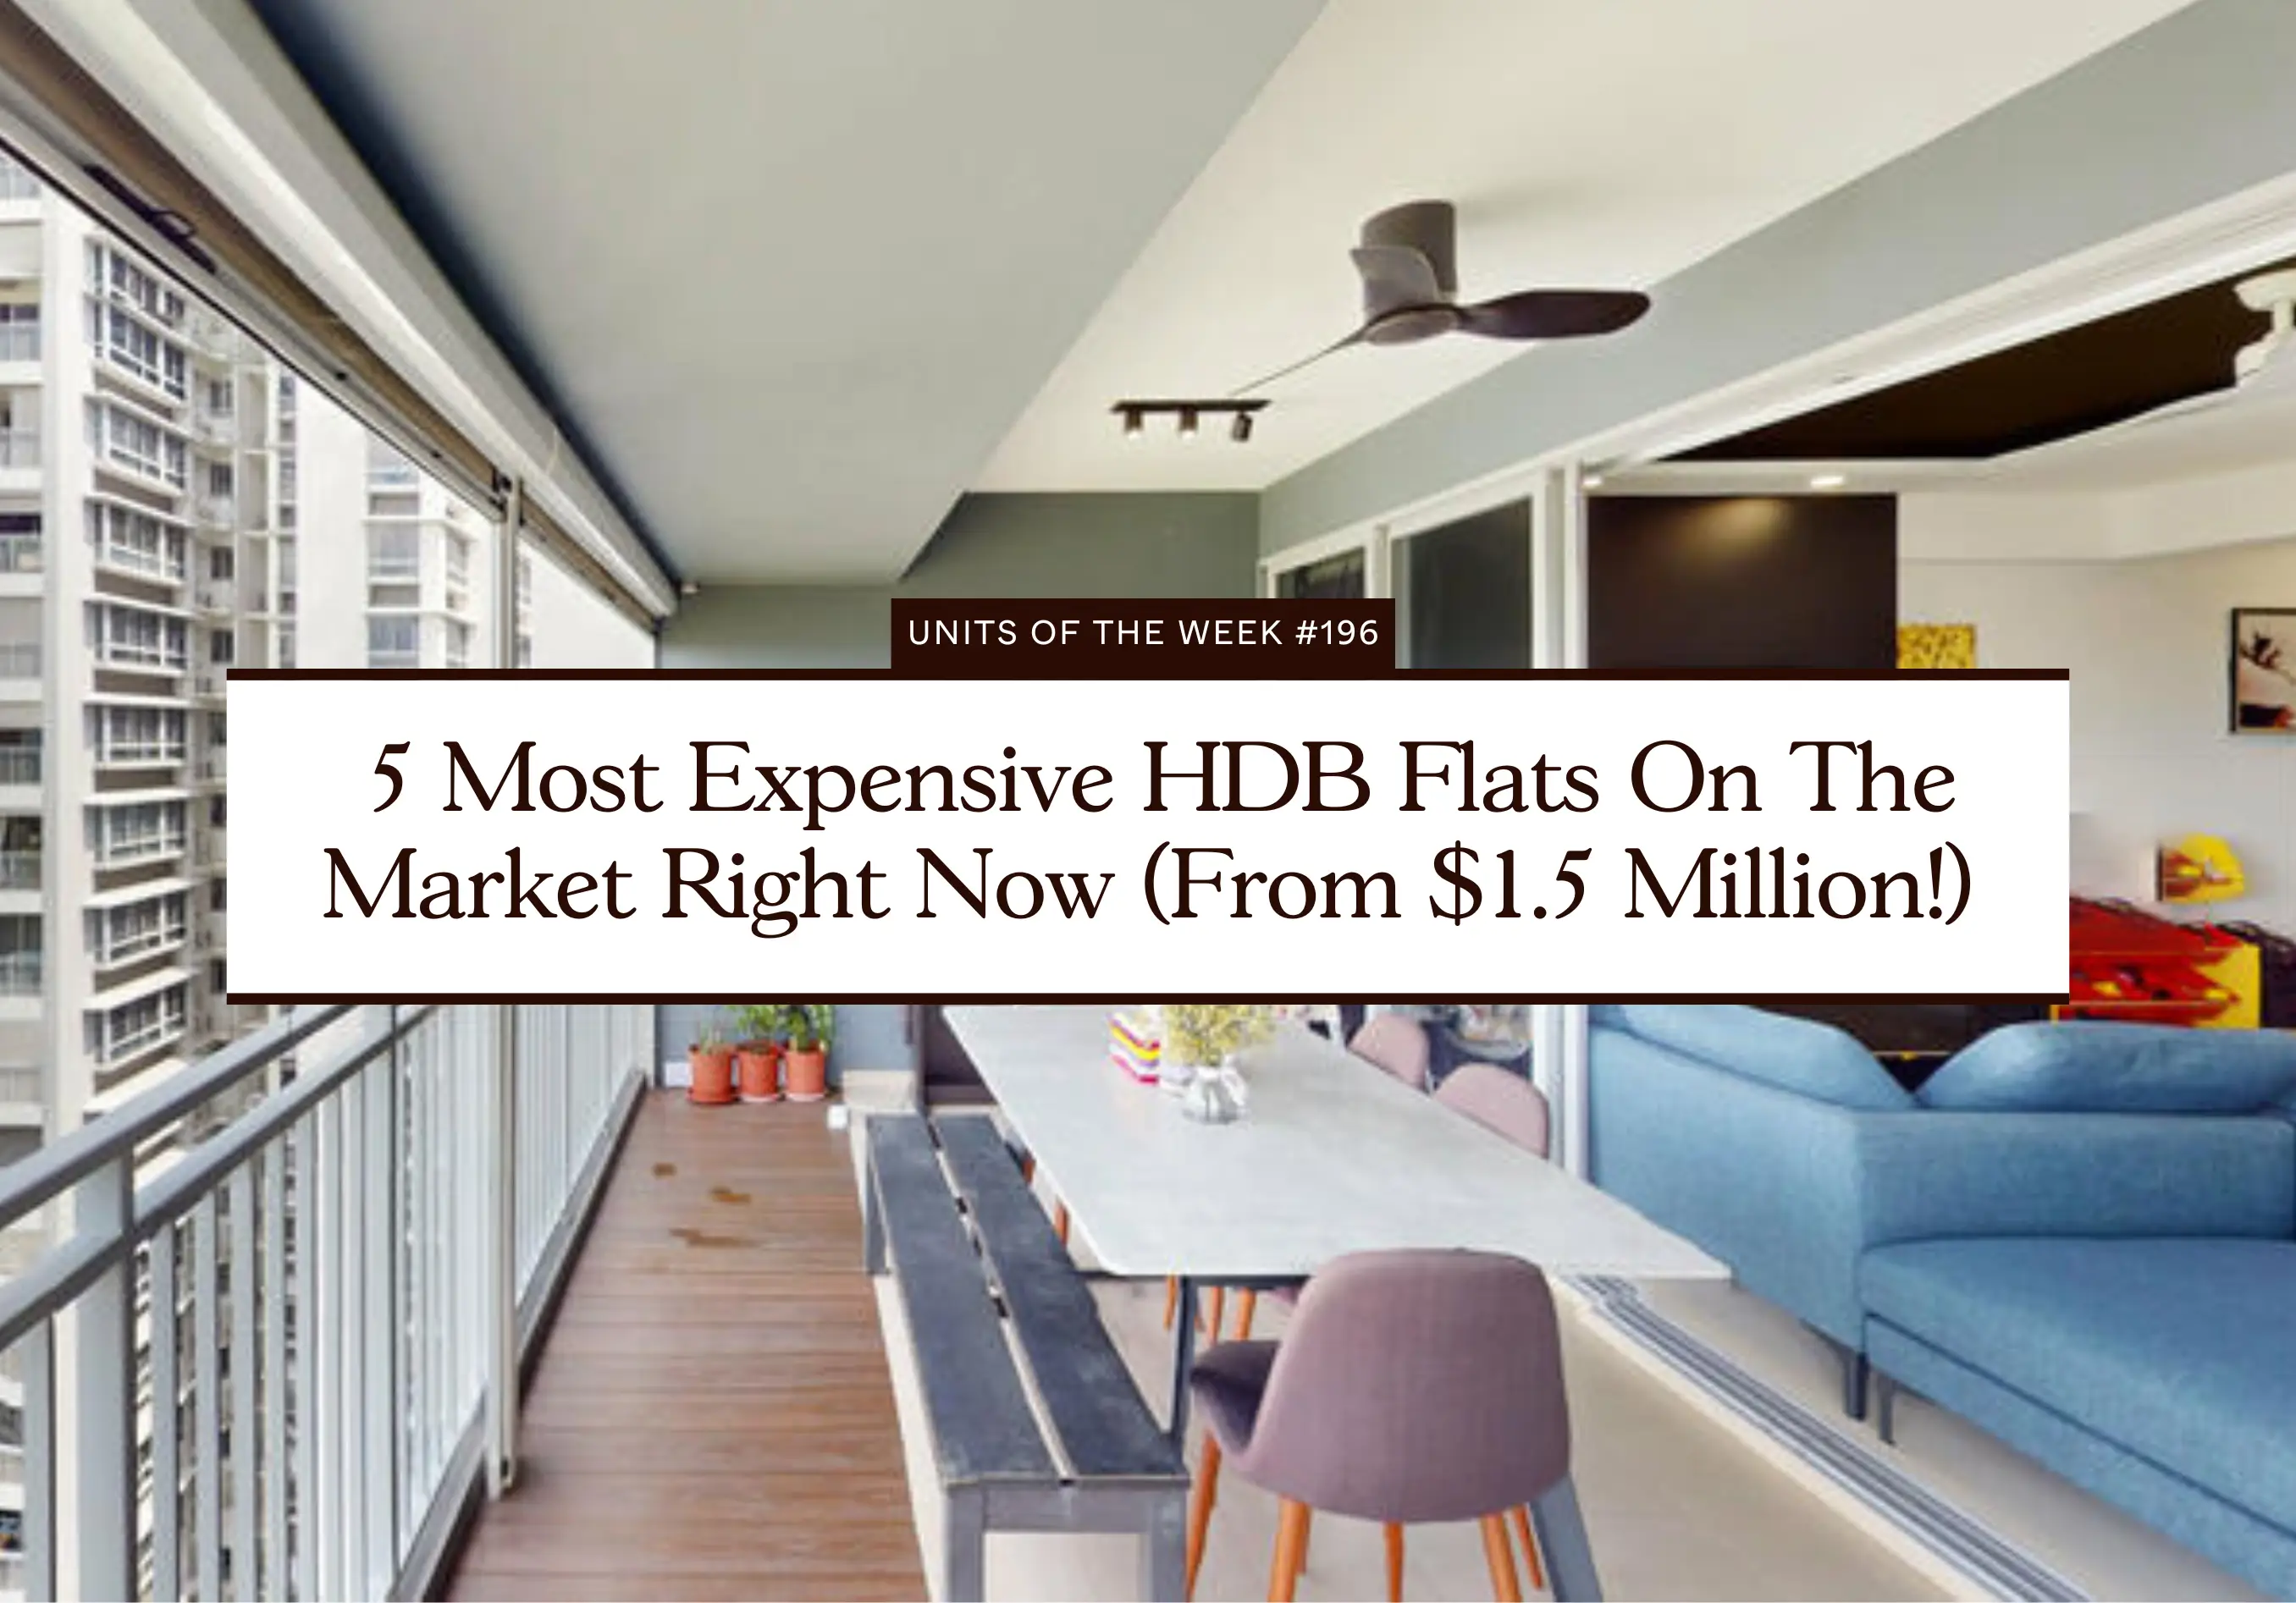 5 Most Expensive HDB Flats On The Market Right Now From 1.5 Million